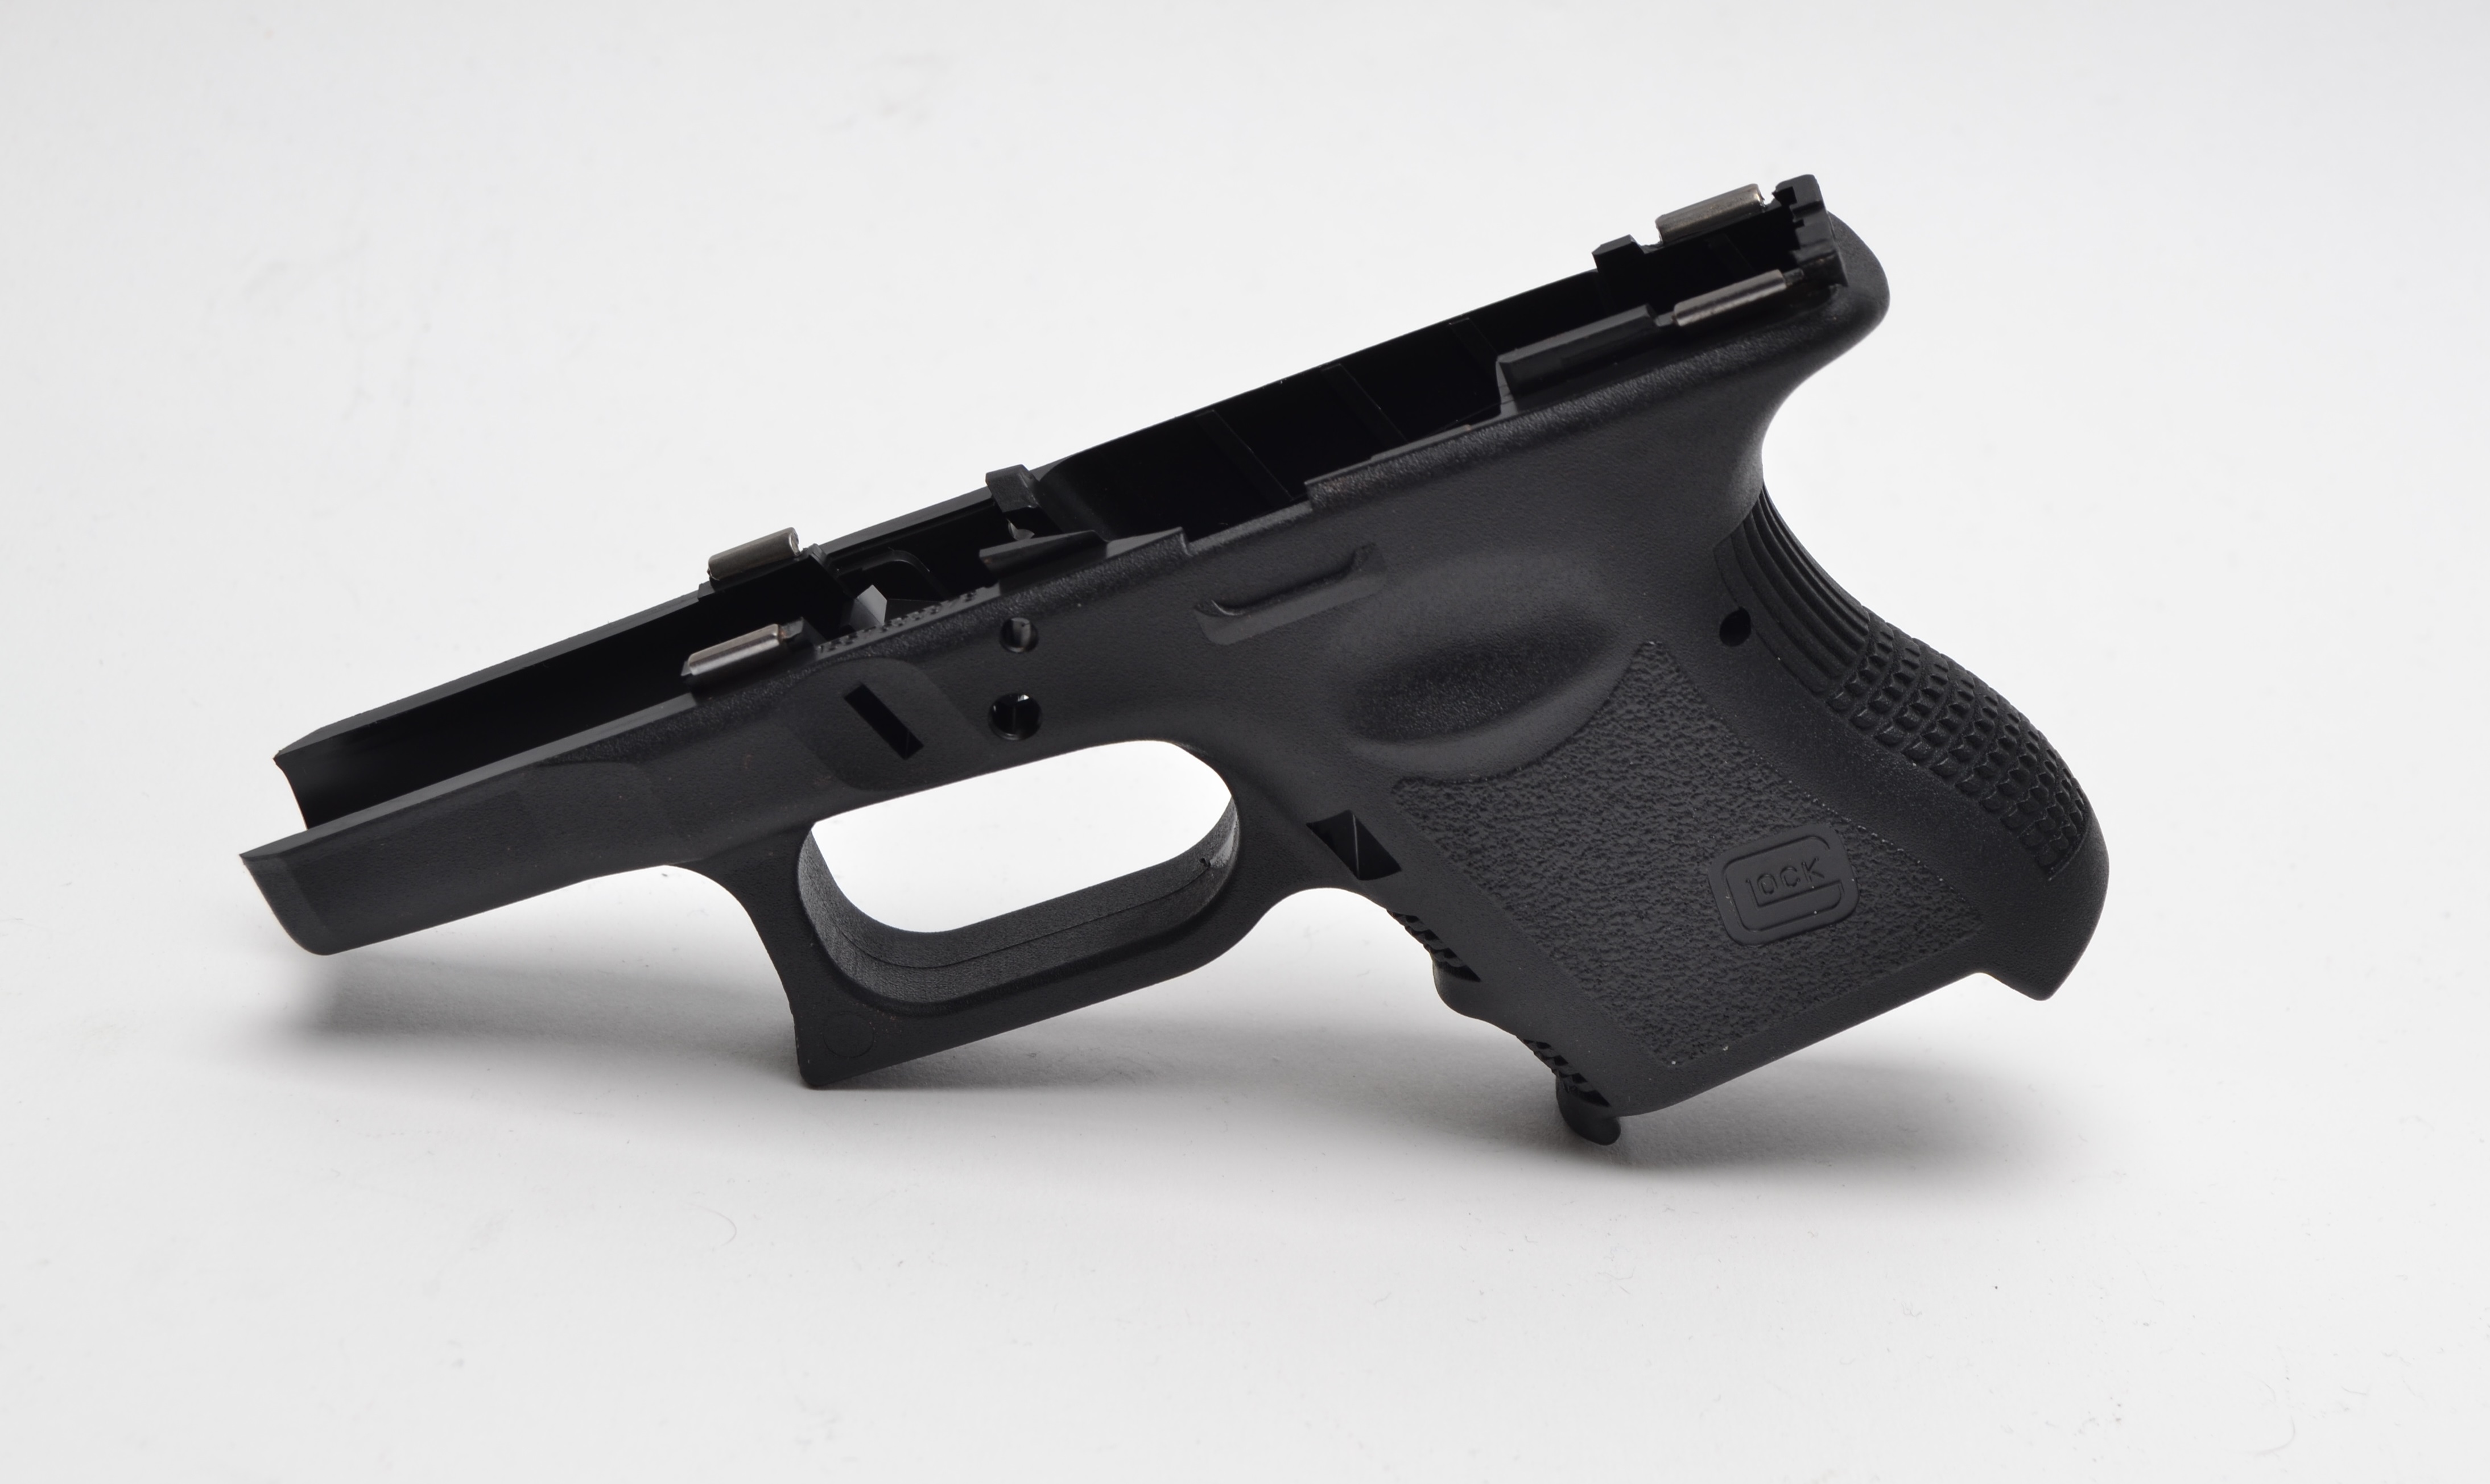 Glock SubCompact Stripped Frames 26 27 on Sale! Magazines Still on sale! - $50